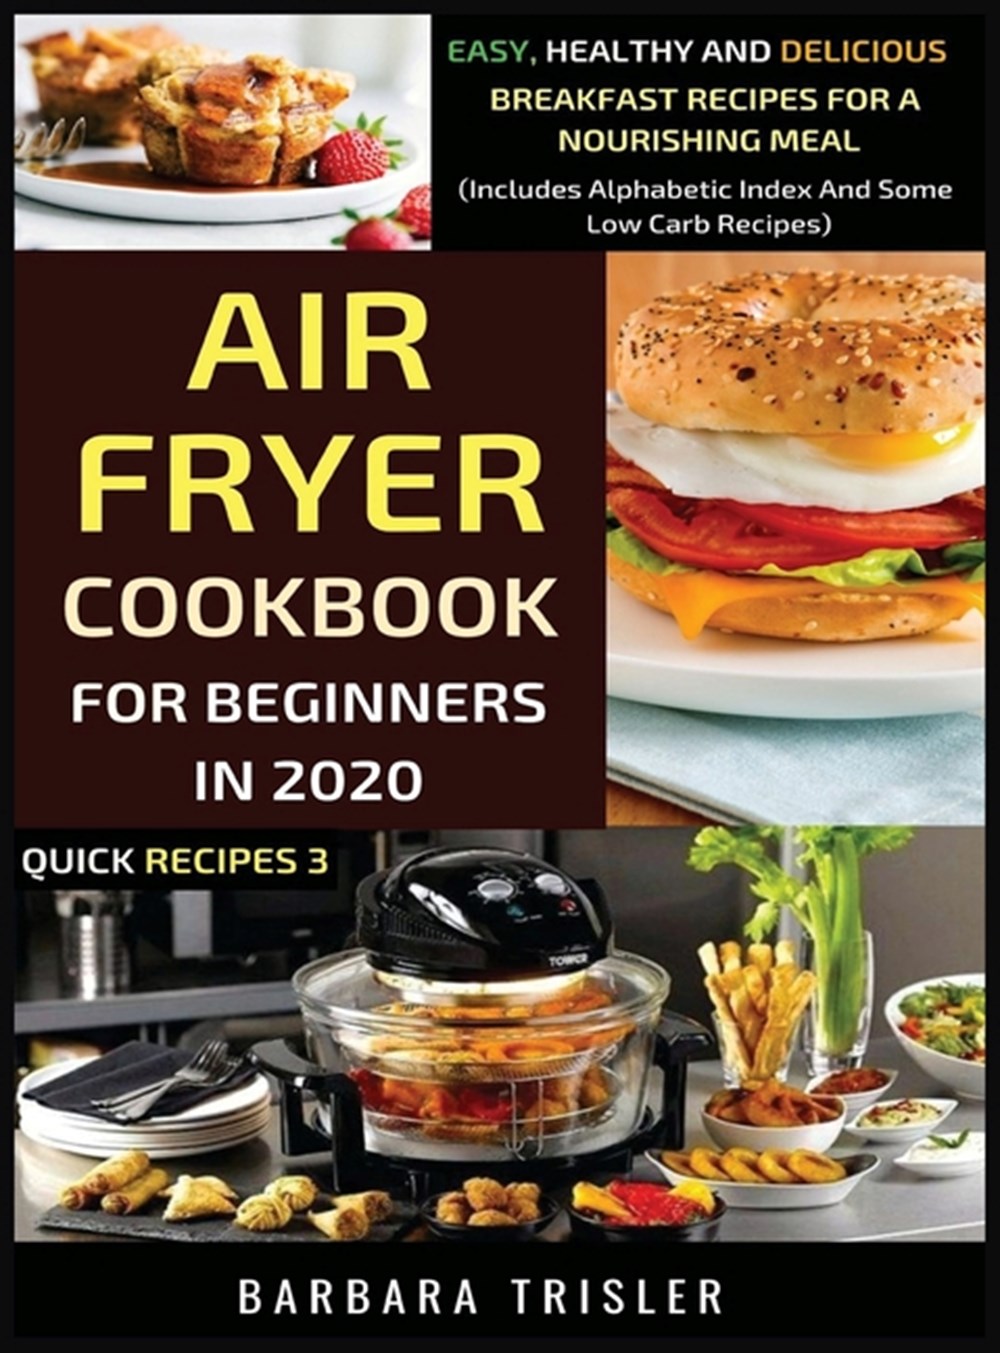 Air Fryer Cookbook For Beginners In 2020 - Easy, Healthy And Delicious Breakfast Recipes For A Nouri